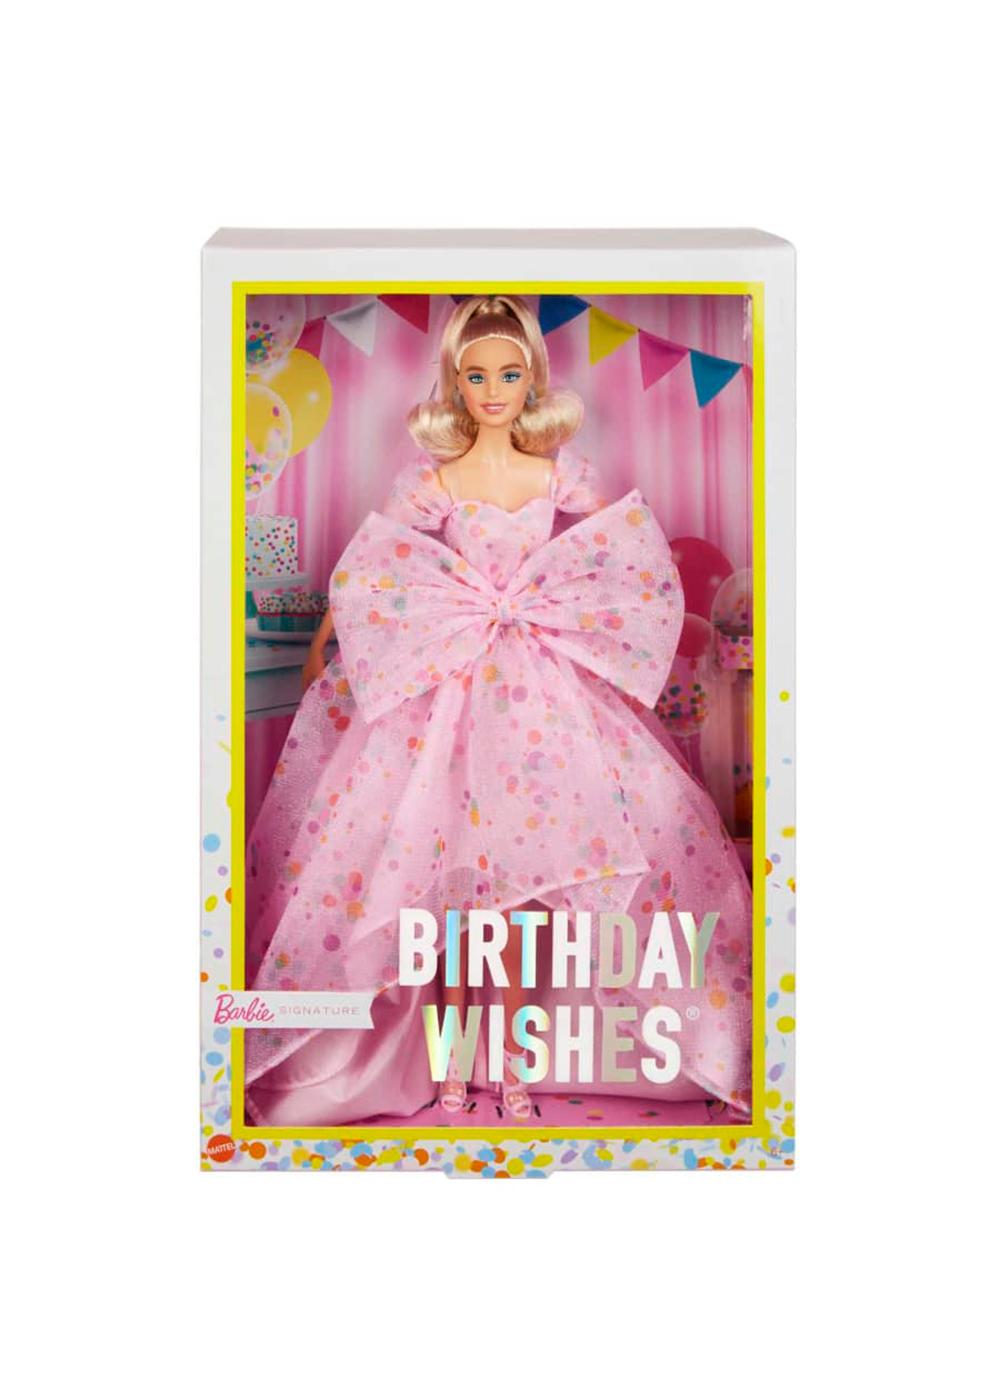 Barbie Signature Birthday Wishes Doll; image 1 of 2